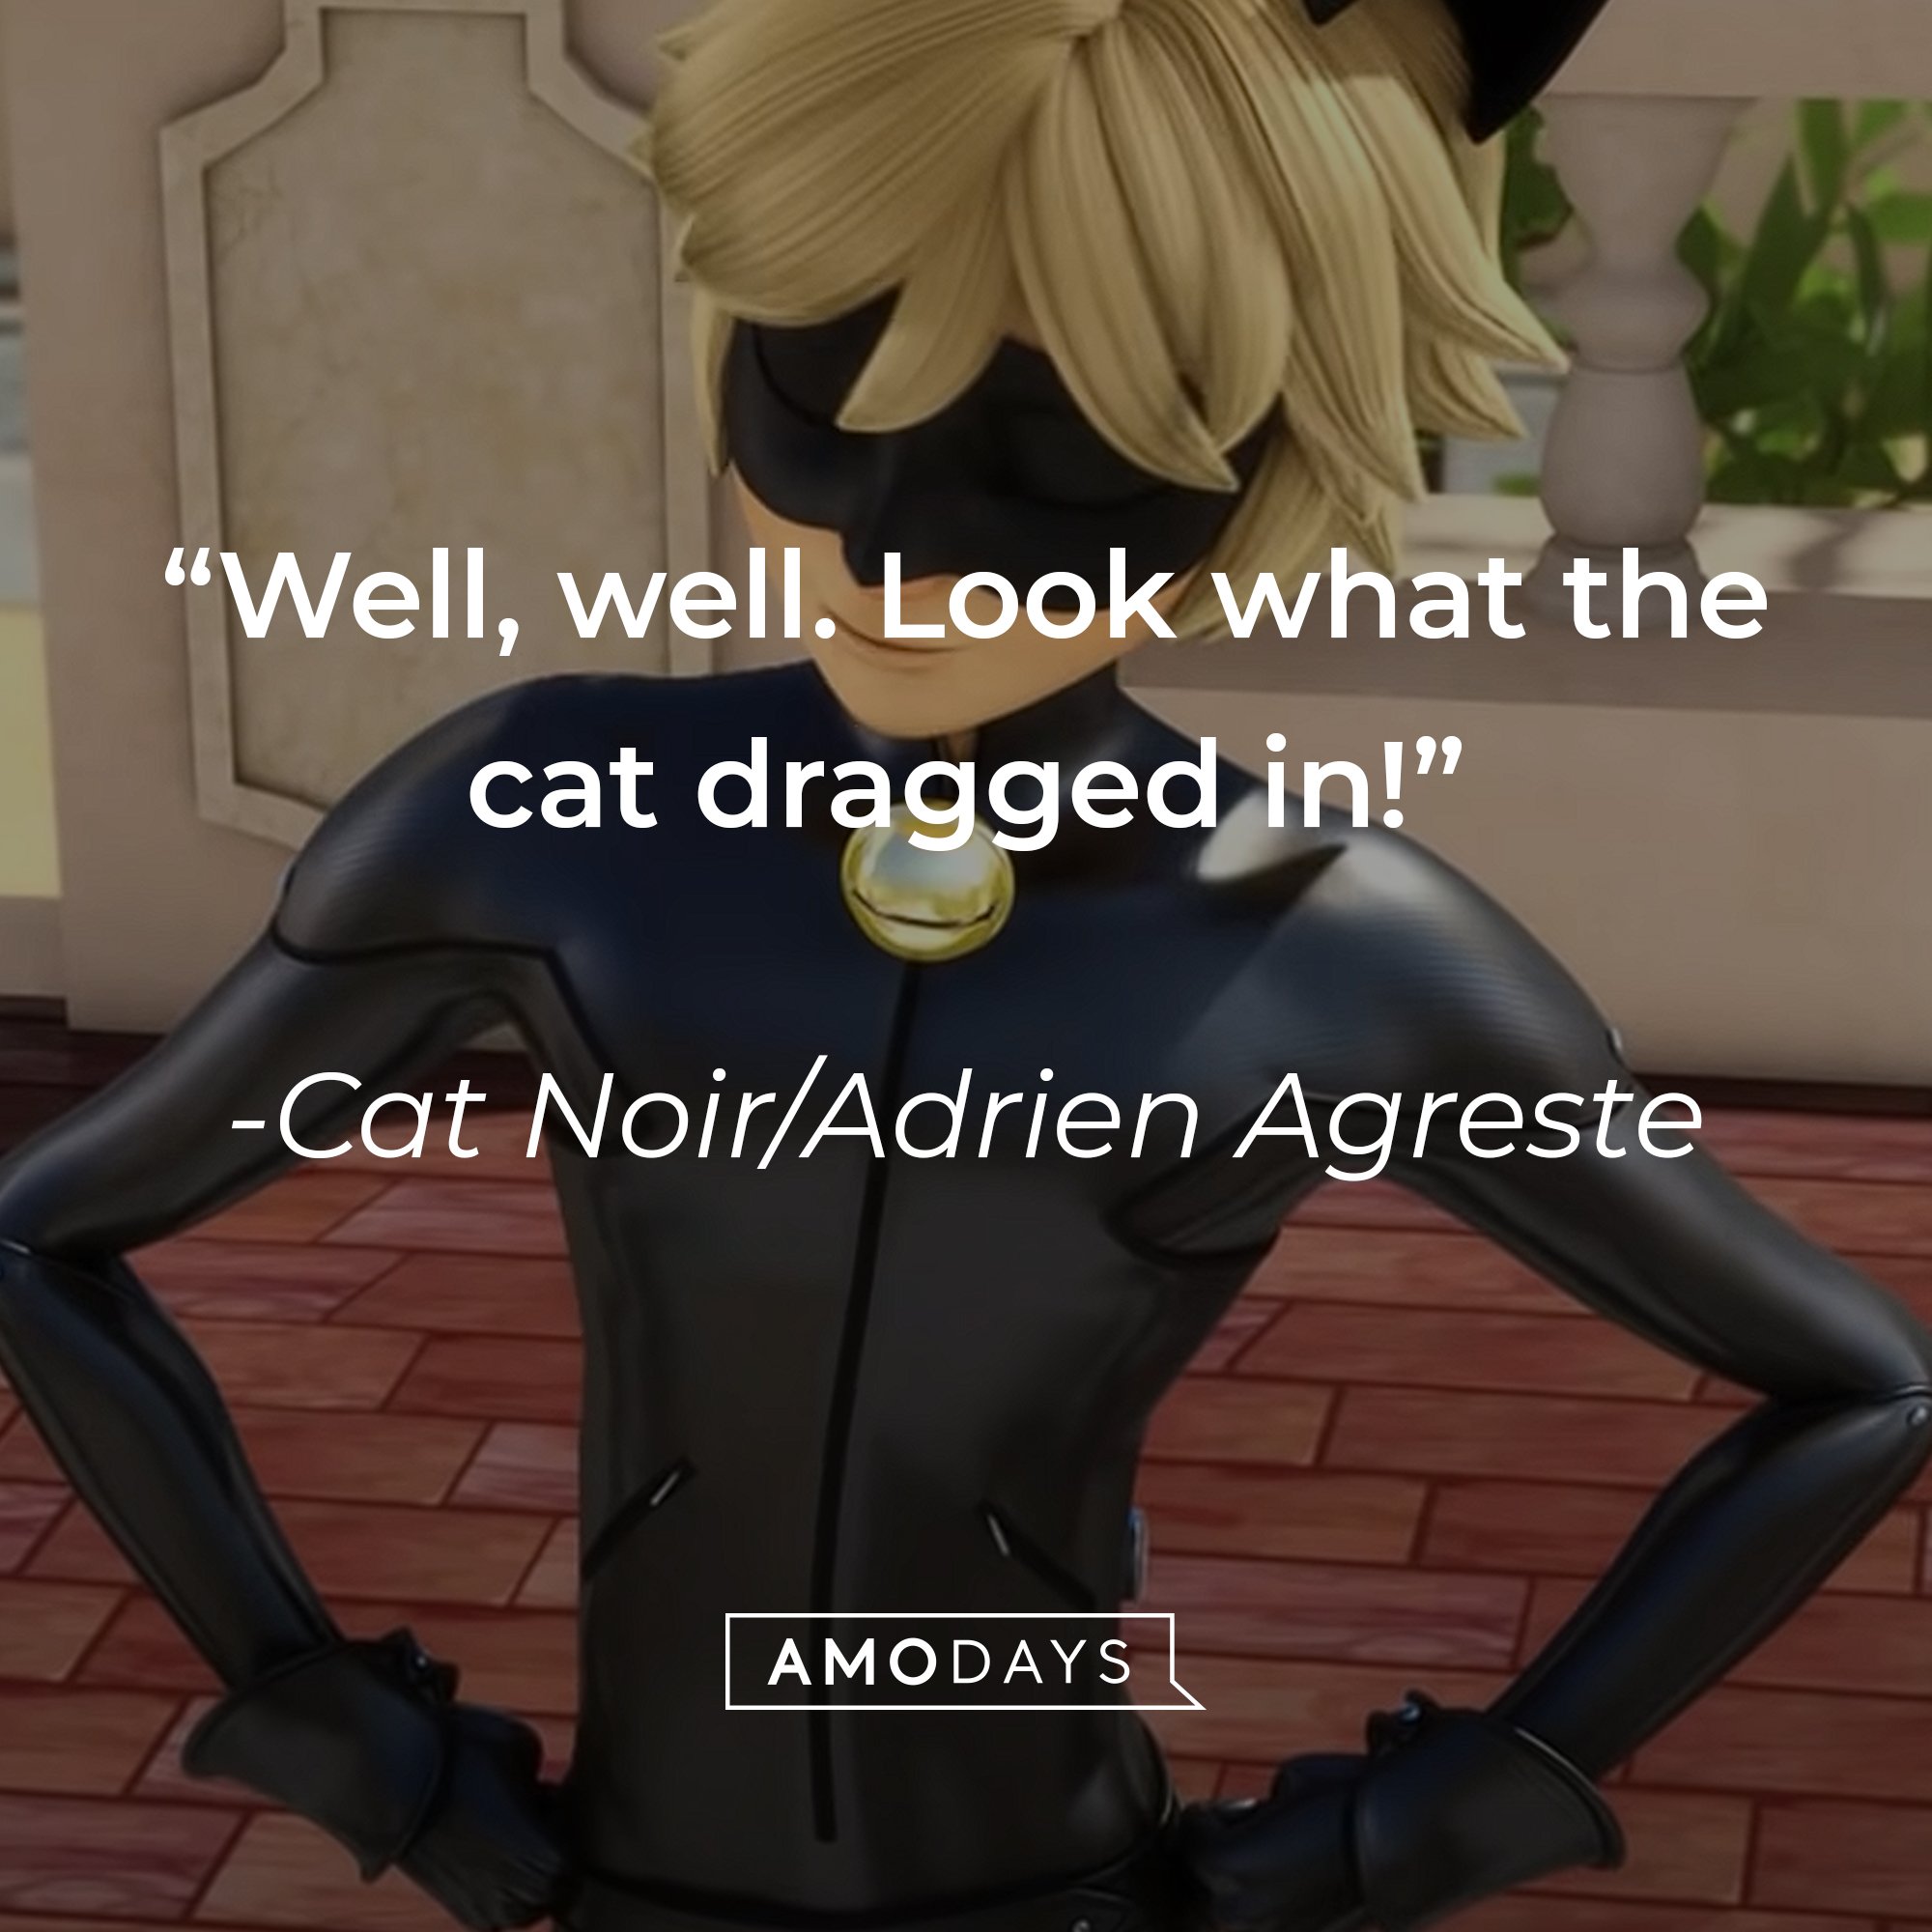  Cat Noir/Adrien Agreste’s quote: "Well, well. Look what the cat dragged in!” | Image: AmoDays 